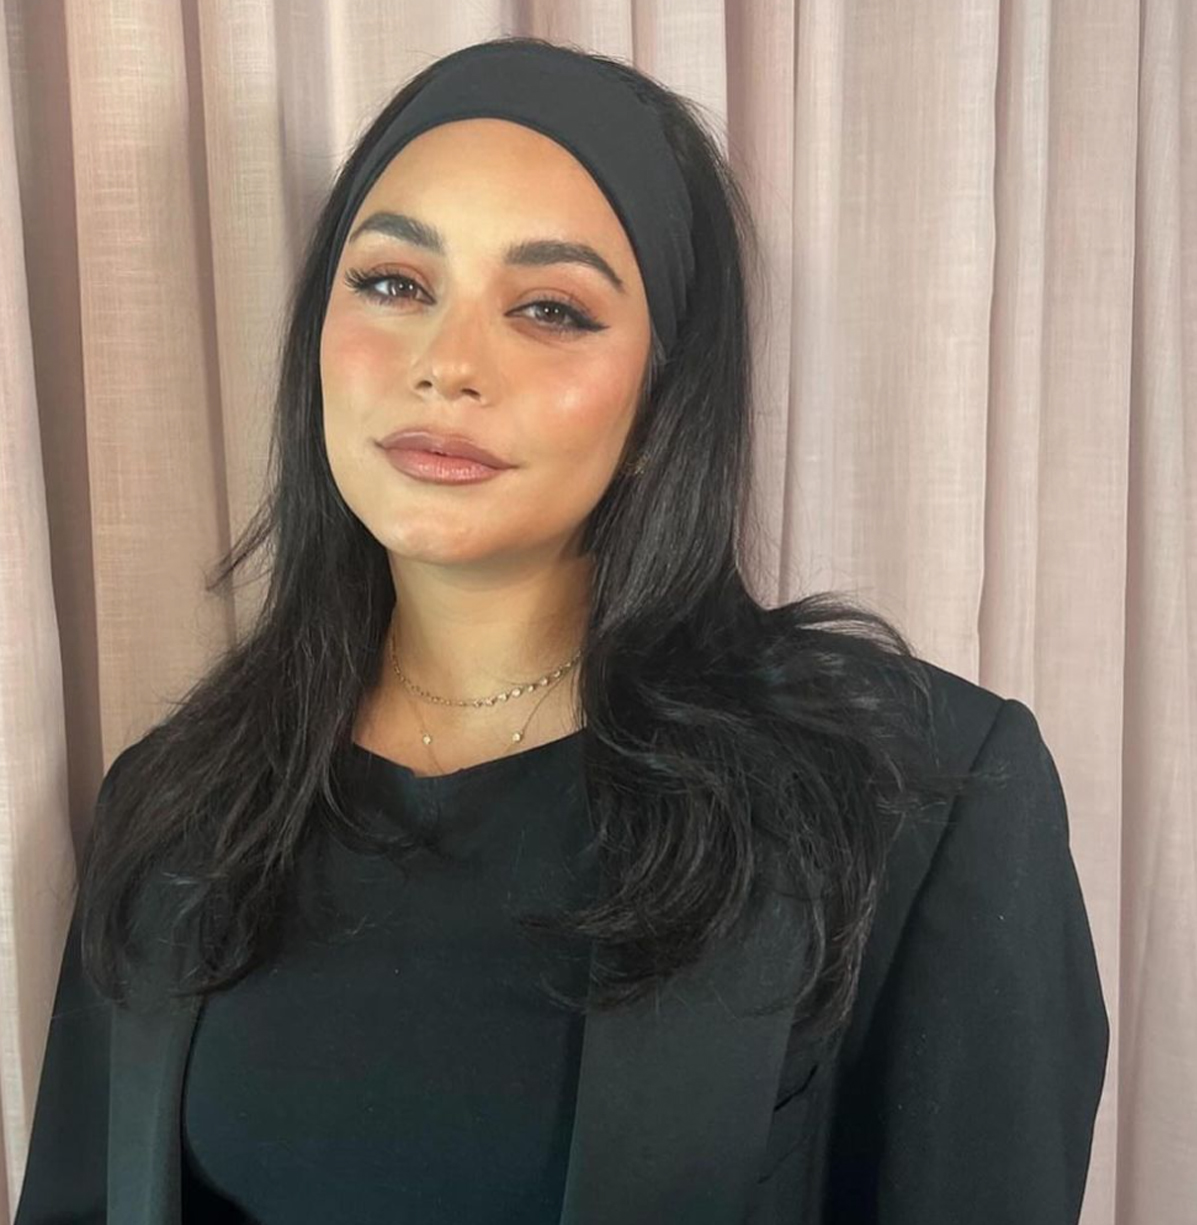 Vanessa Hudgens Makes Statement Confirming The Birth Of Her First Child – And She’s So ‘Disappointed’